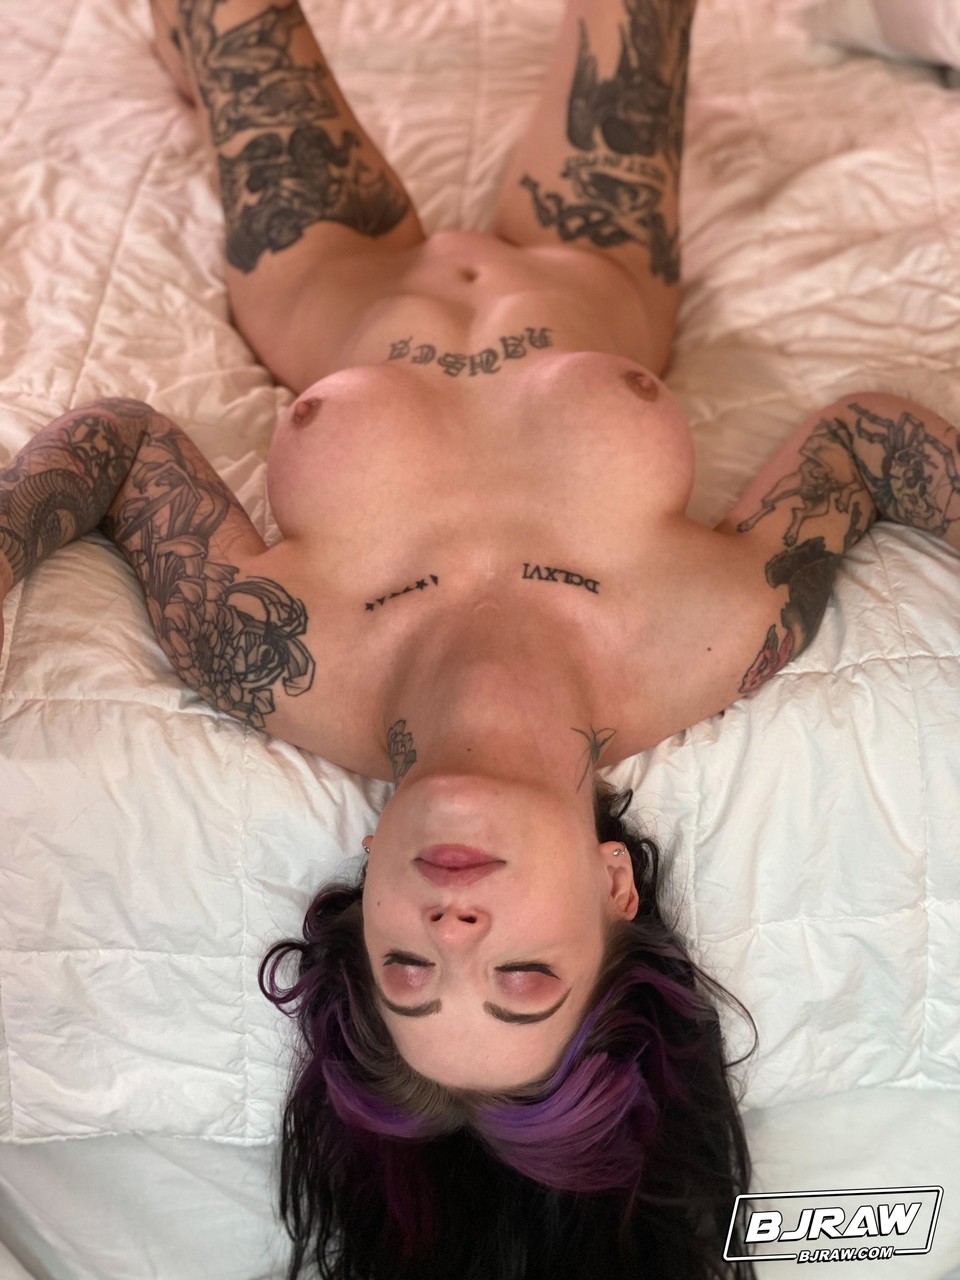 Brunette babe with tattoos Charlotte Sartre takes a dick in her mouth porno foto #424649935 | BJ Raw Pics, Charlotte Sartre, Tattoo, mobiele porno